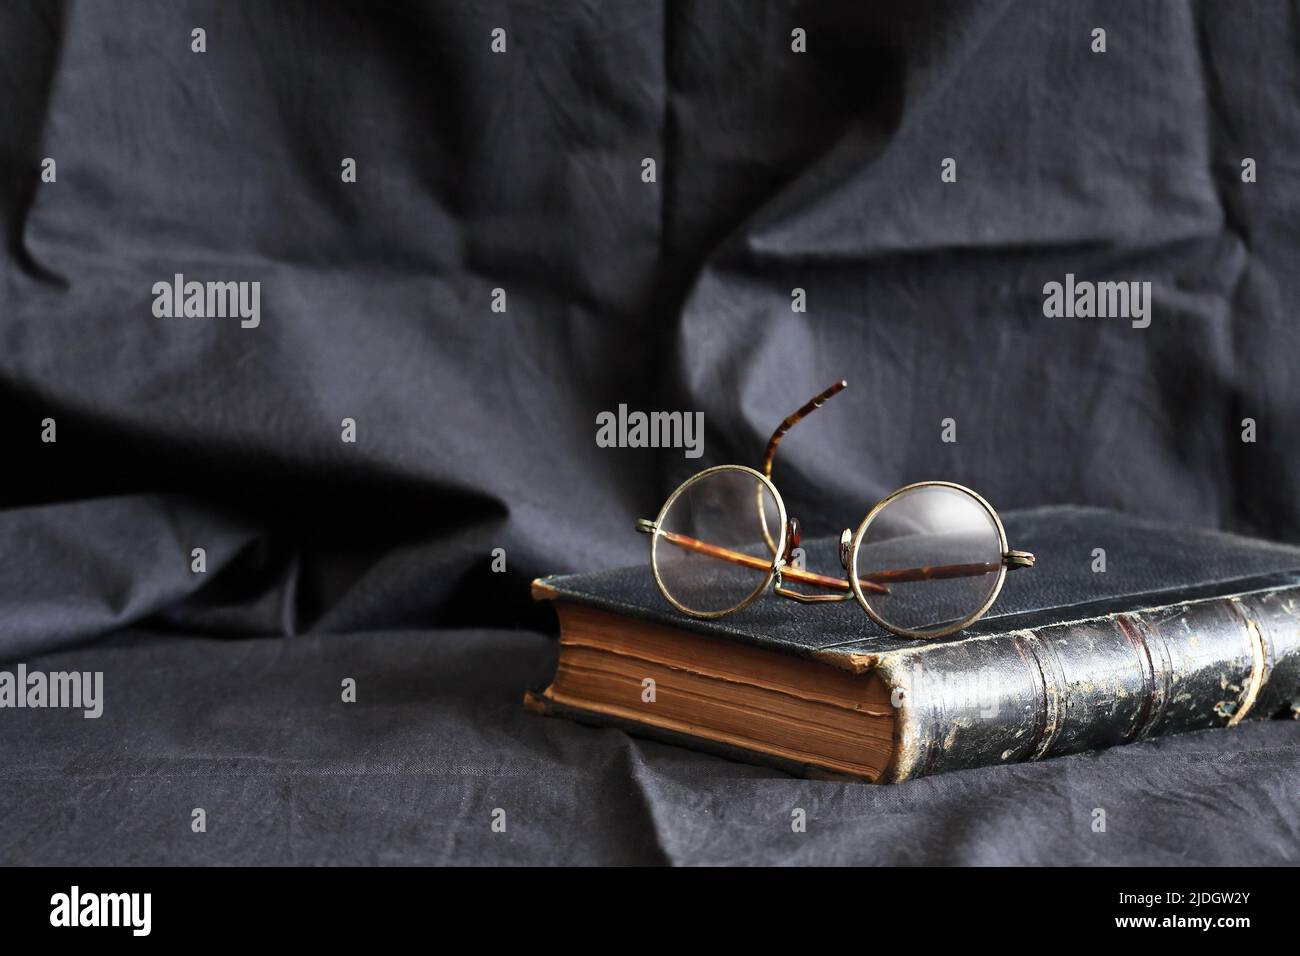 Old book and old glasses against dark textile beckground Stock Photo